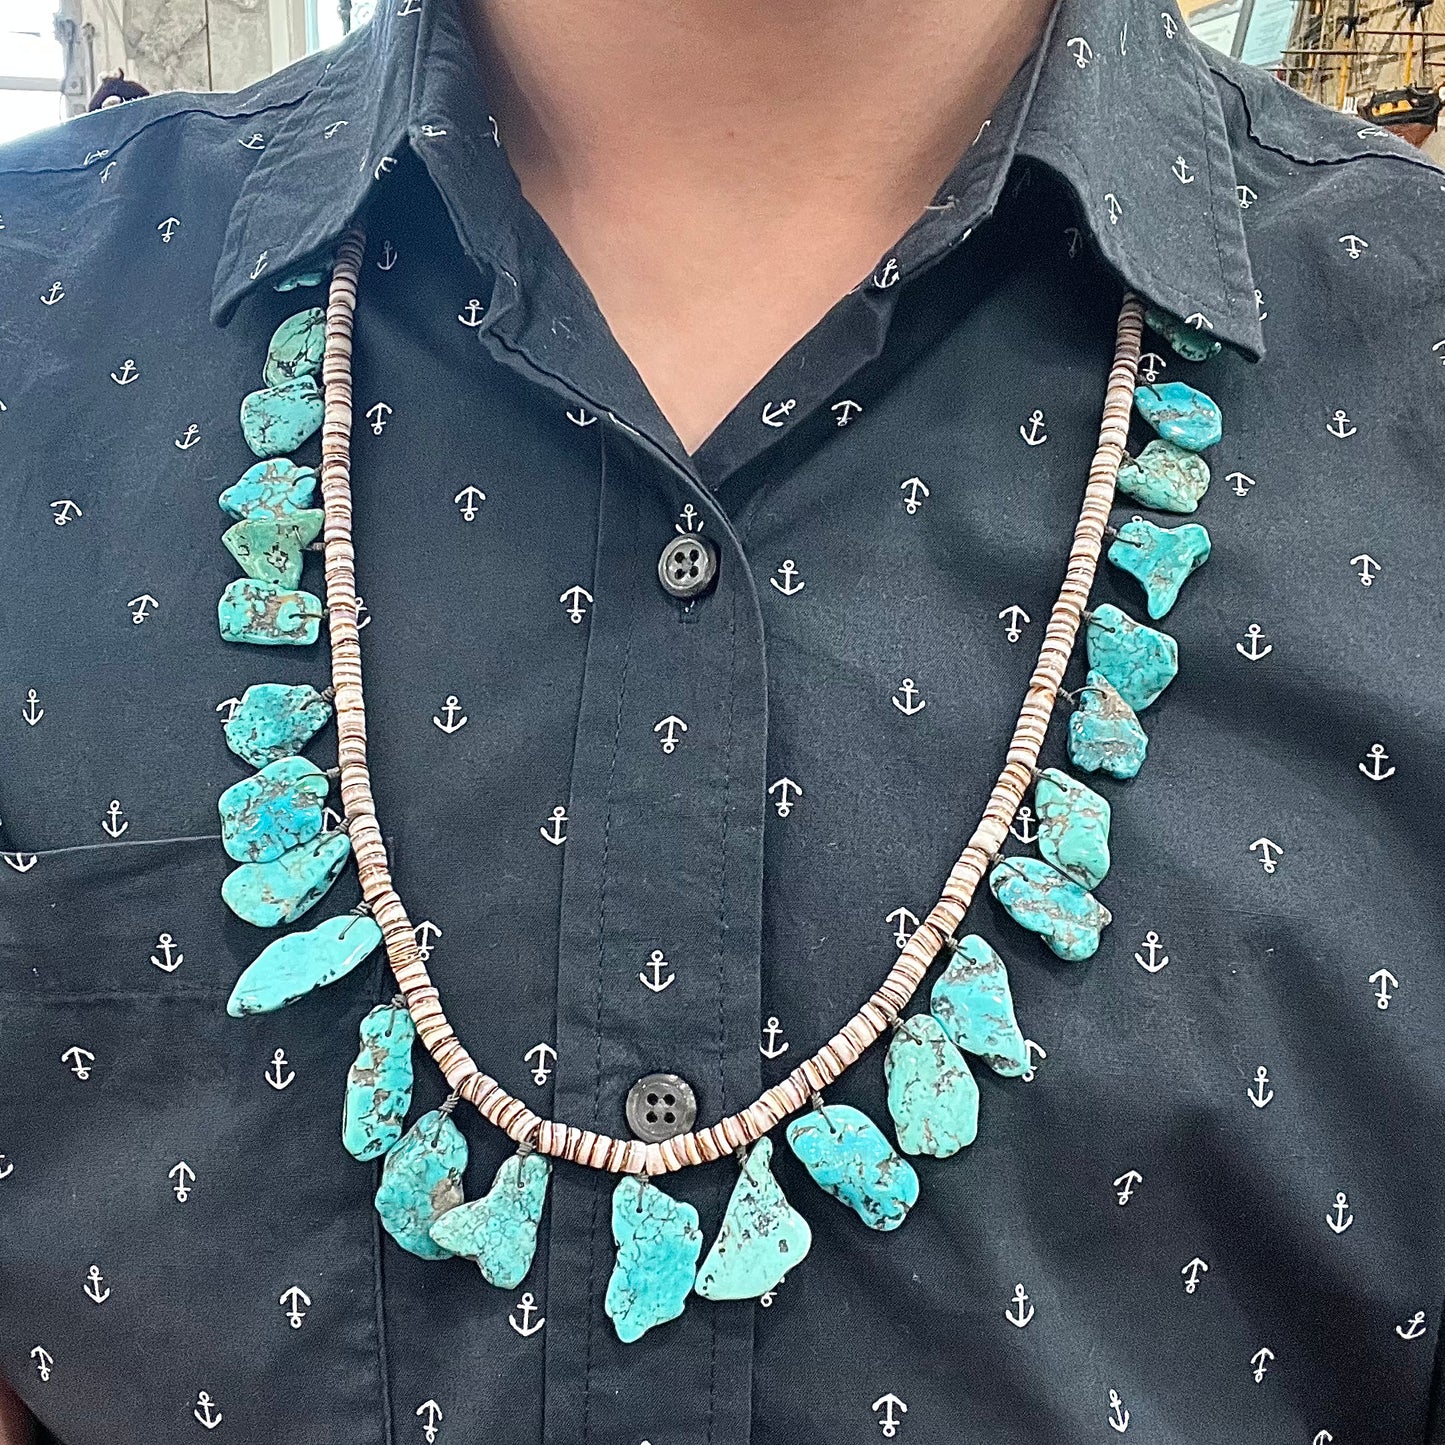 A Santo Domingo puka shell bead necklace with drilled turquoise nuggets attached.